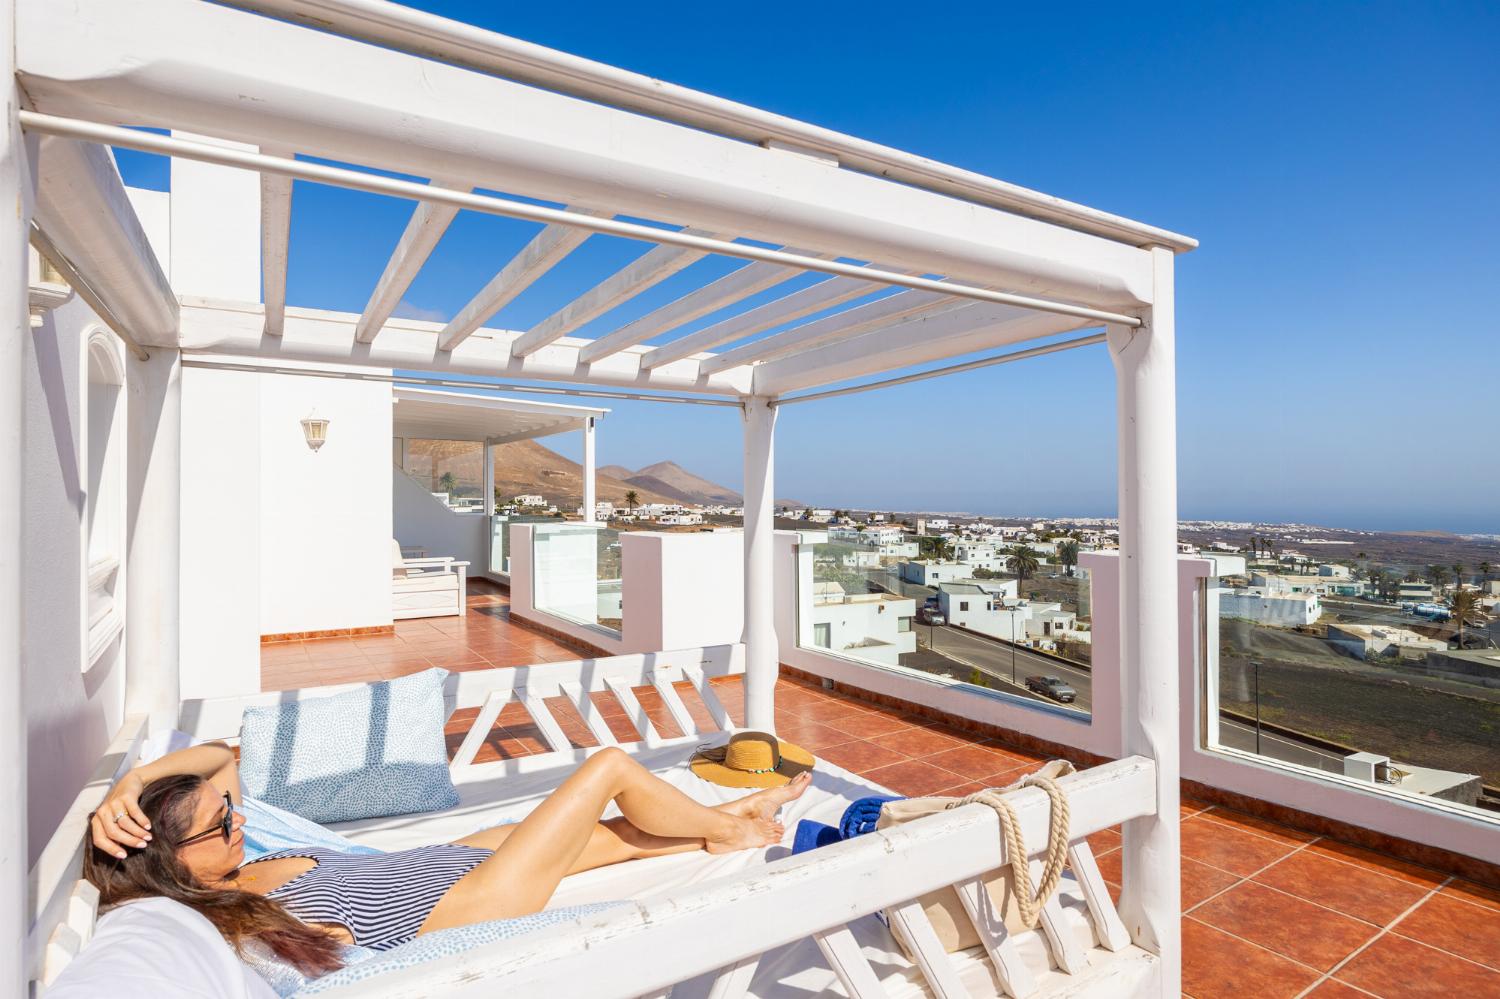 Unit 3: upper terrace area with panoramic sea views